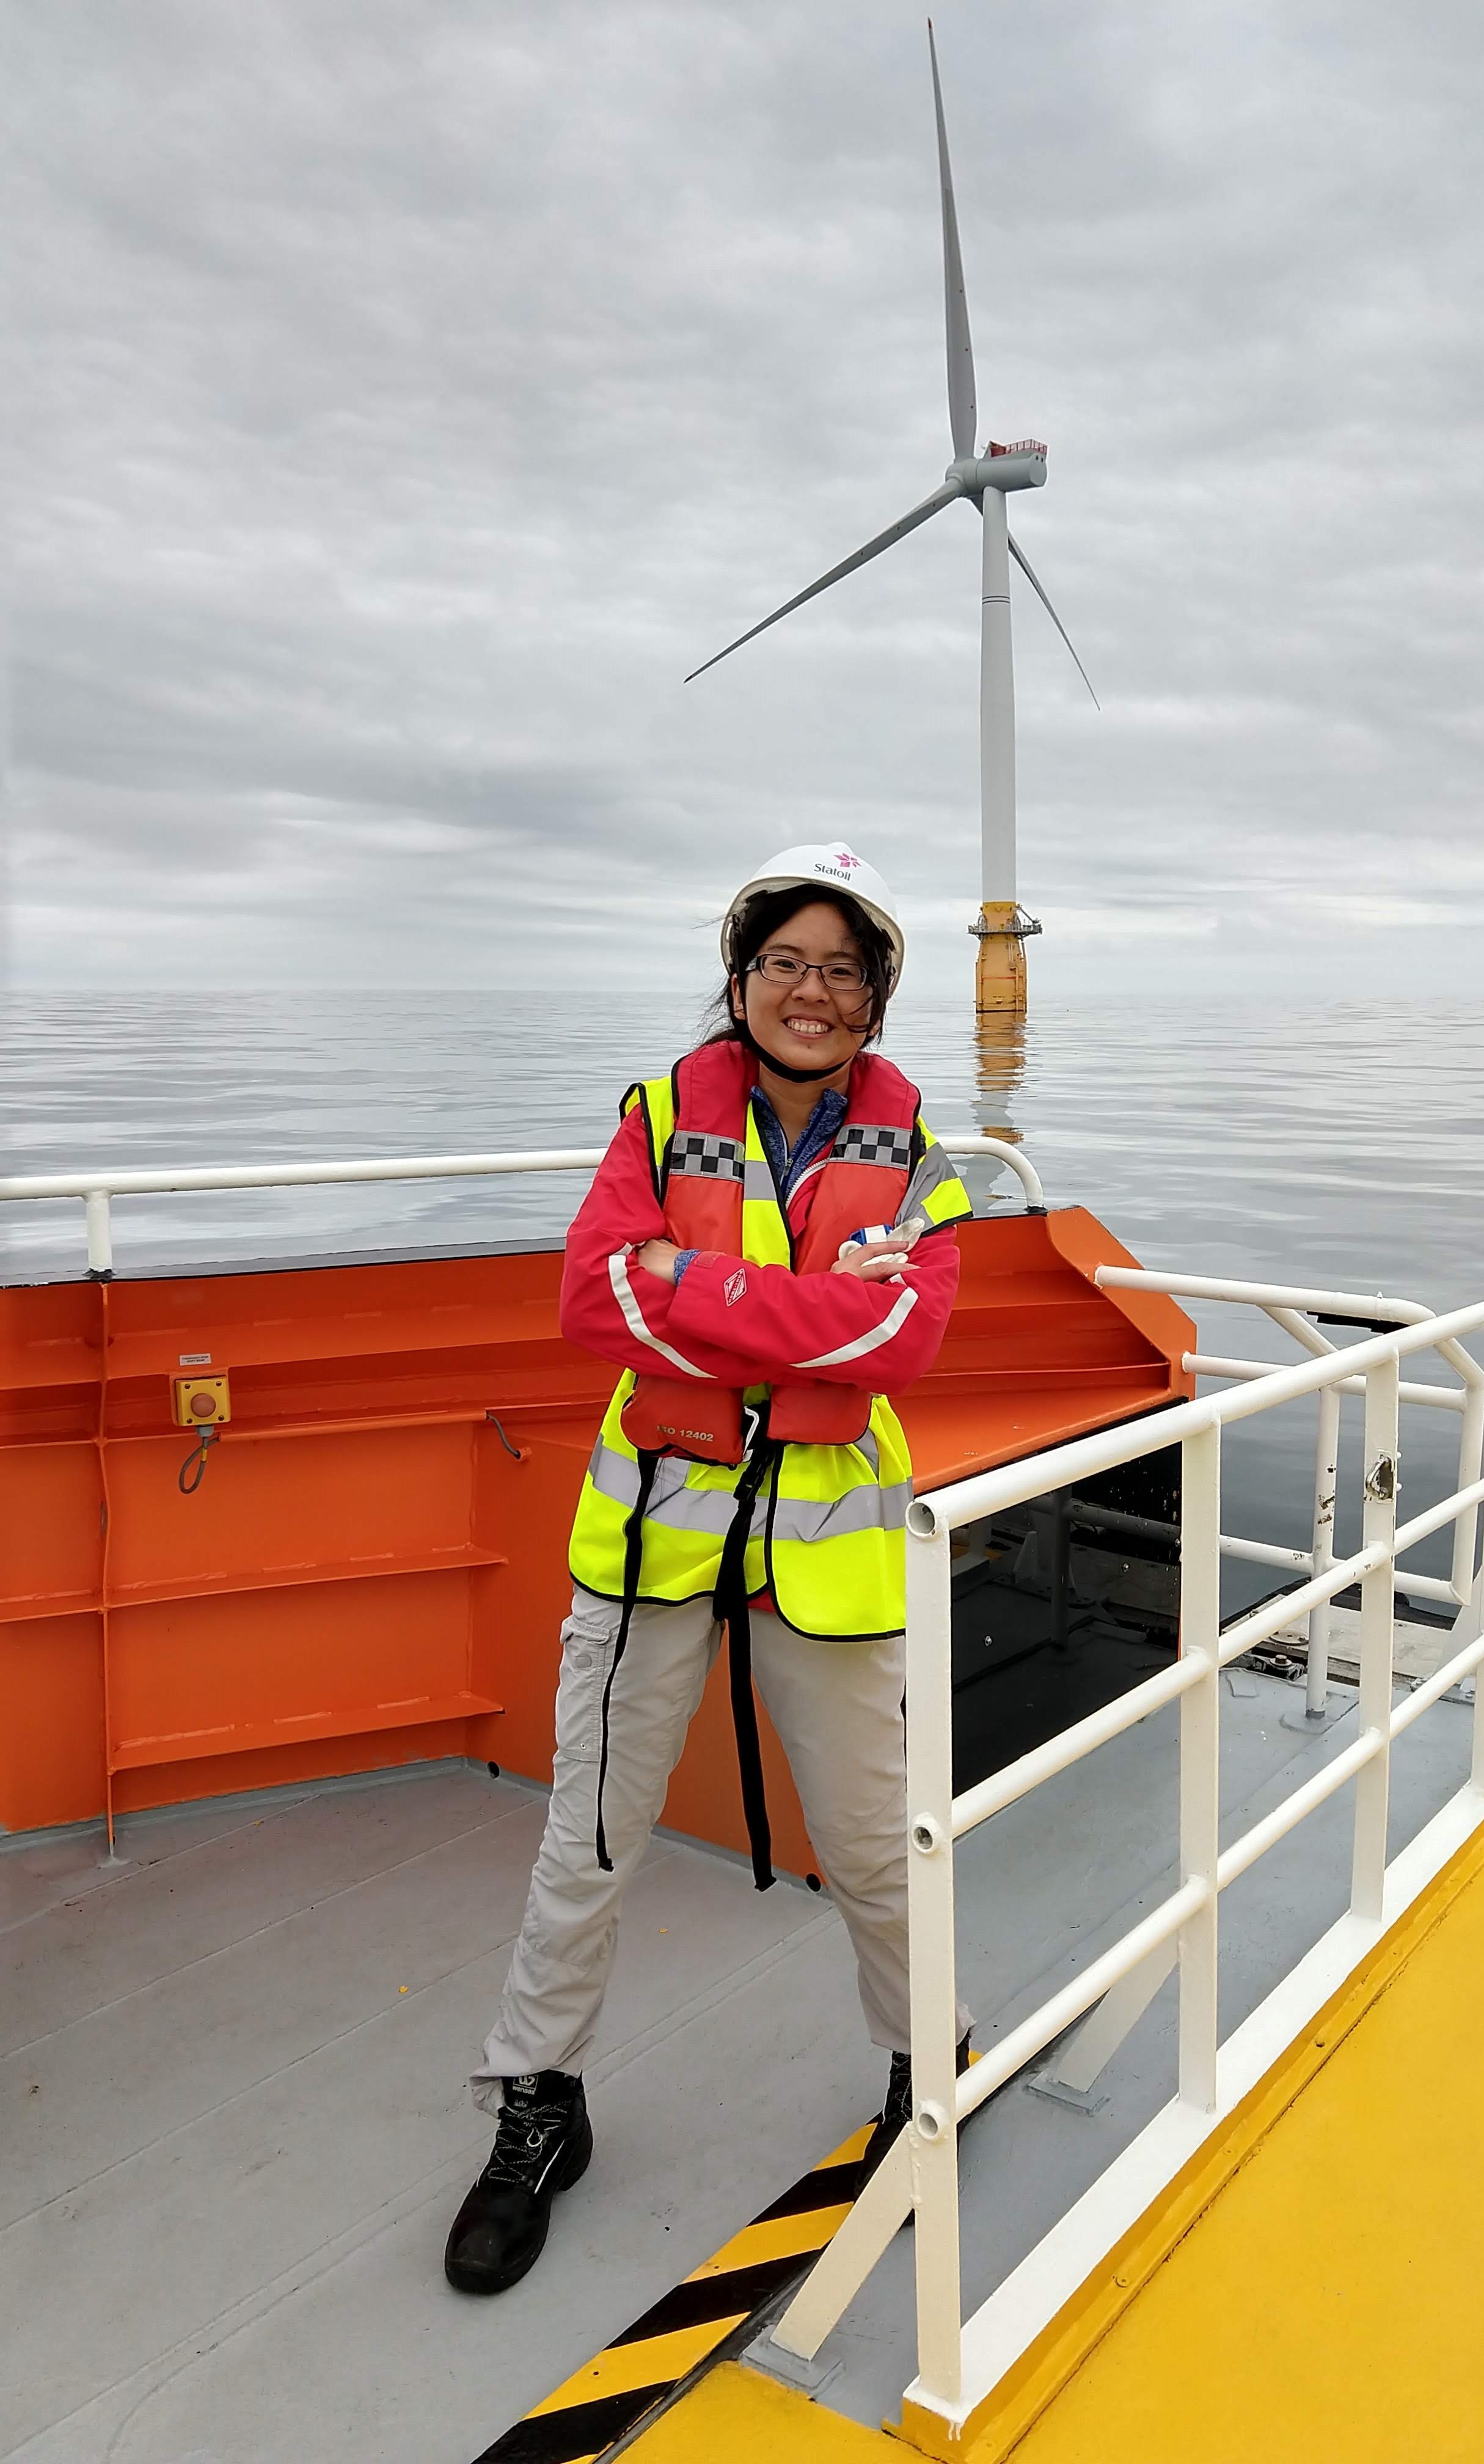 Researcher Yi-Hui Wang, in an orange life vest, on the deck of a boat in front of an offshore wind turbine